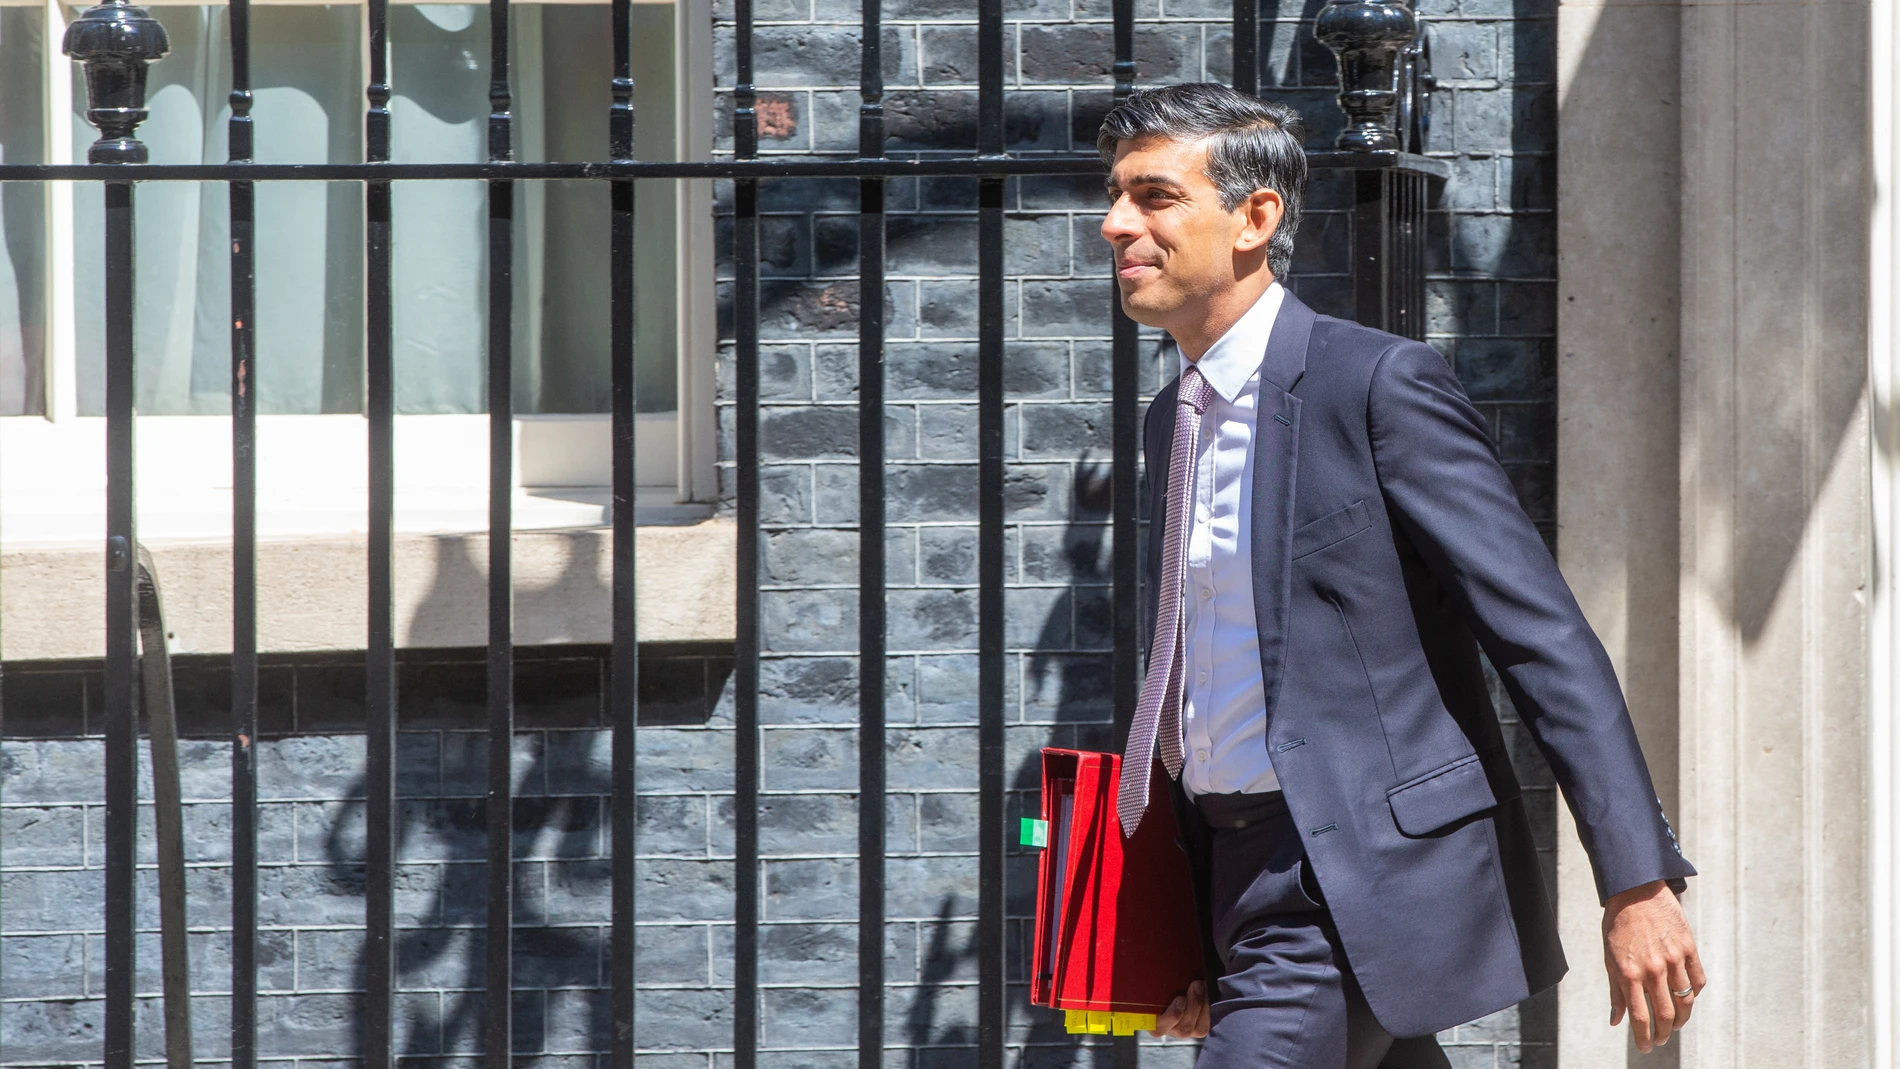 June 14, 2023, London, England, United Kingdom: UK Prime Minister RISHI SUNAK leaves 10 Downing Street ahead of the weekly Prime Minister's Questions session in the House of Commons. (Foto de ARCHIVO)14/06/2023